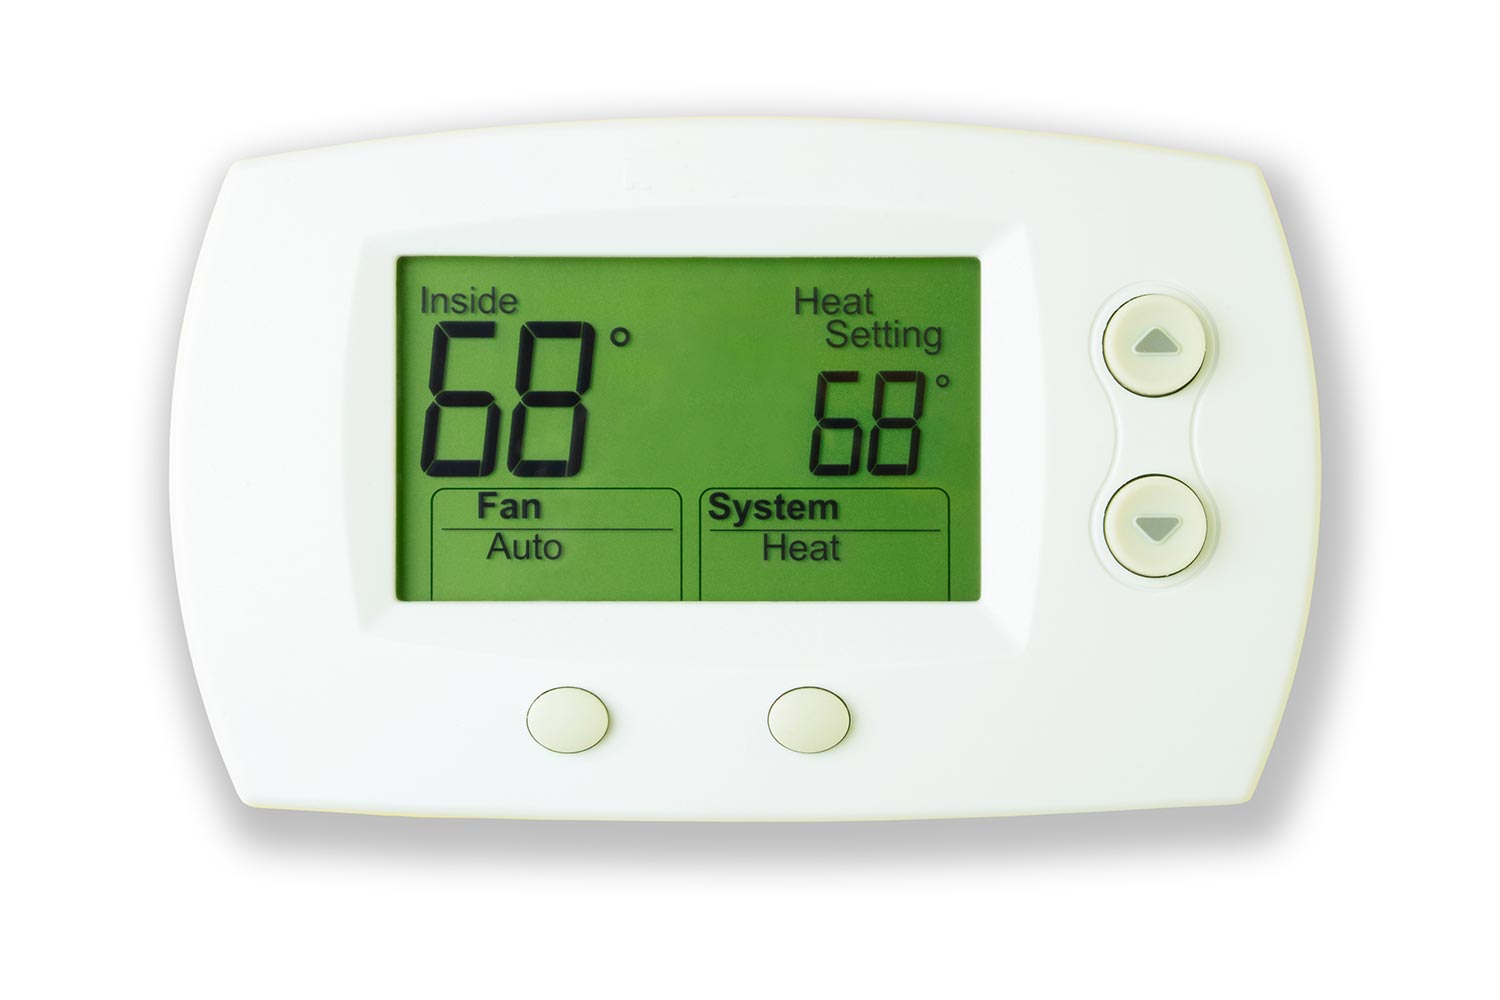 Thermostat is set on an energy-efficient setting of 68 Degrees